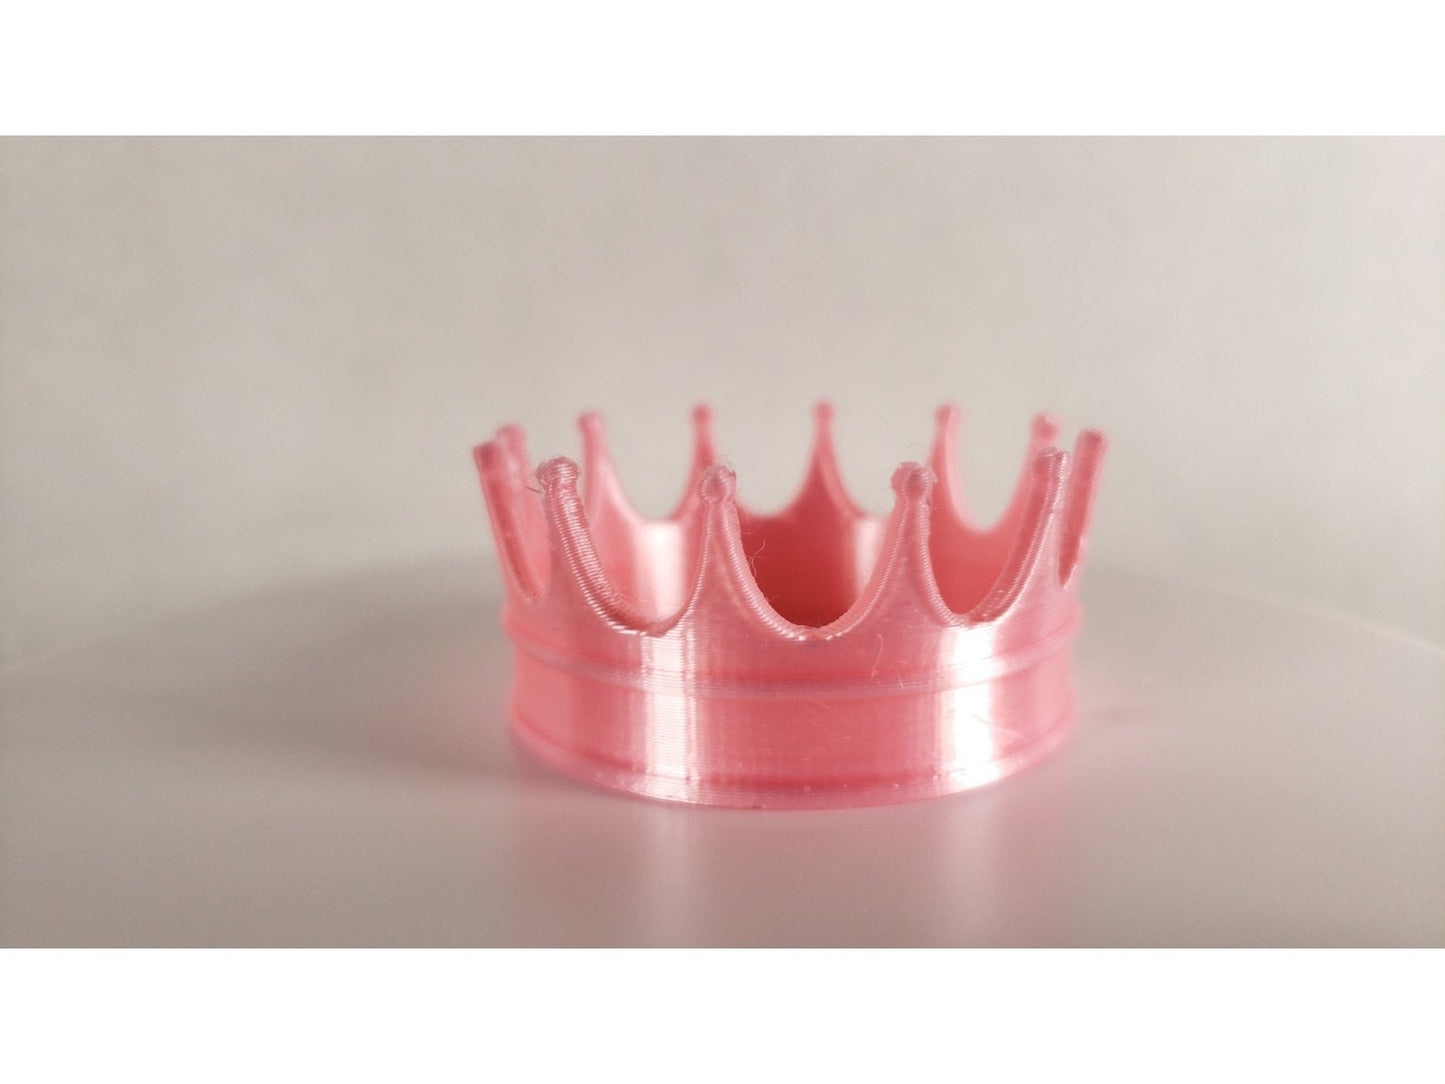 Crown Attachment for Headset, Gaming and Streaming Headset Accessories, cosplay, Streaming Prop, gaming streamer gift